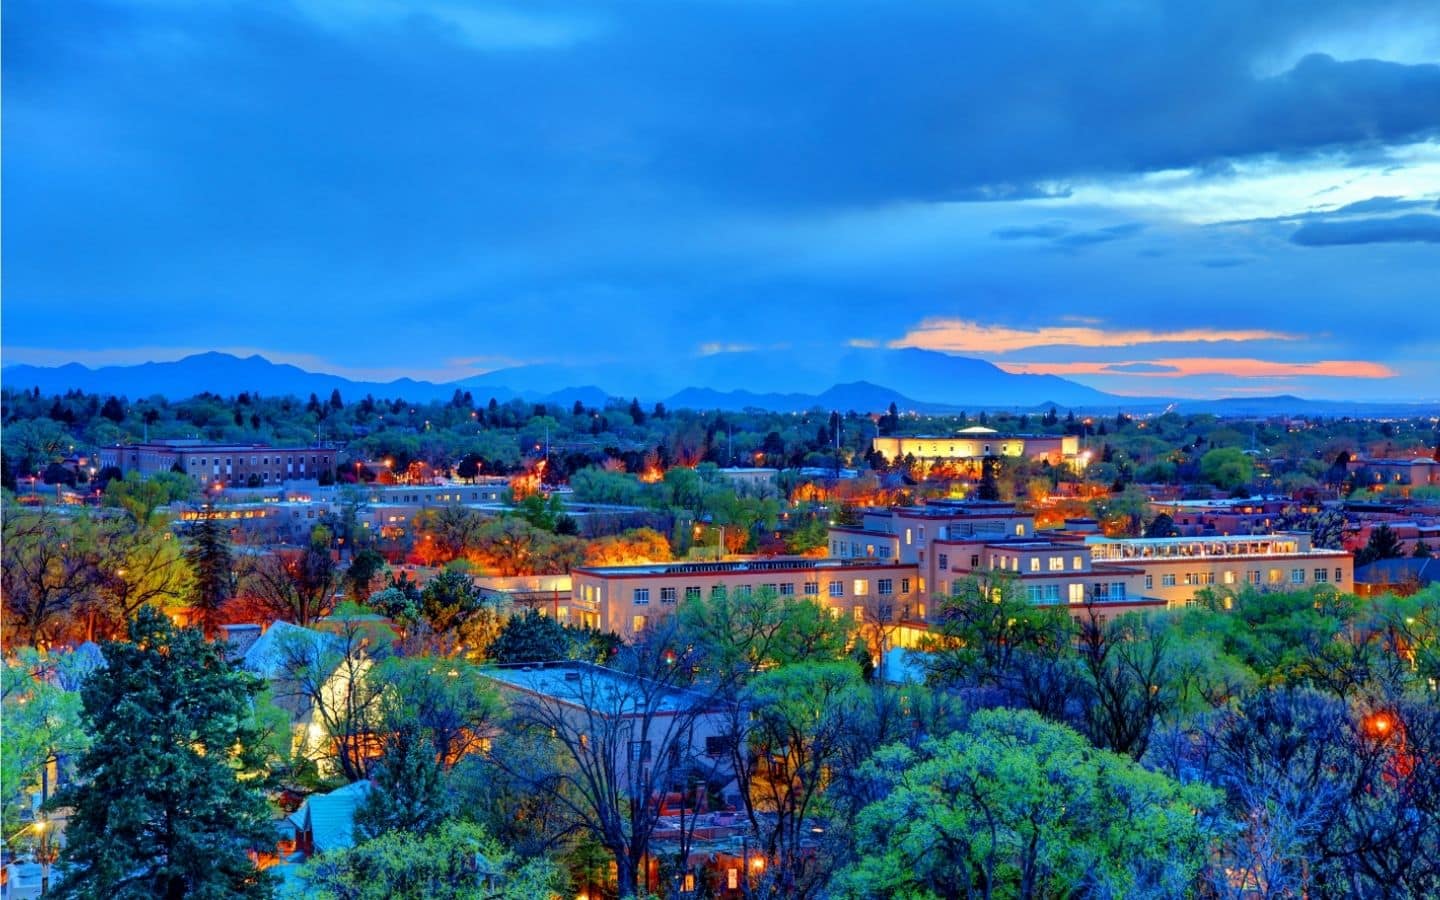 Aerial view of Santa Fe at dusk with lots of warm lighting and pastel colors|Mixologist serving drinks at the bar at Radish and Rye restaurant|seating area in atrium area at Herve Wine Bar in Santa FE|Couple at snow skiing at top of mountain ski santa fe